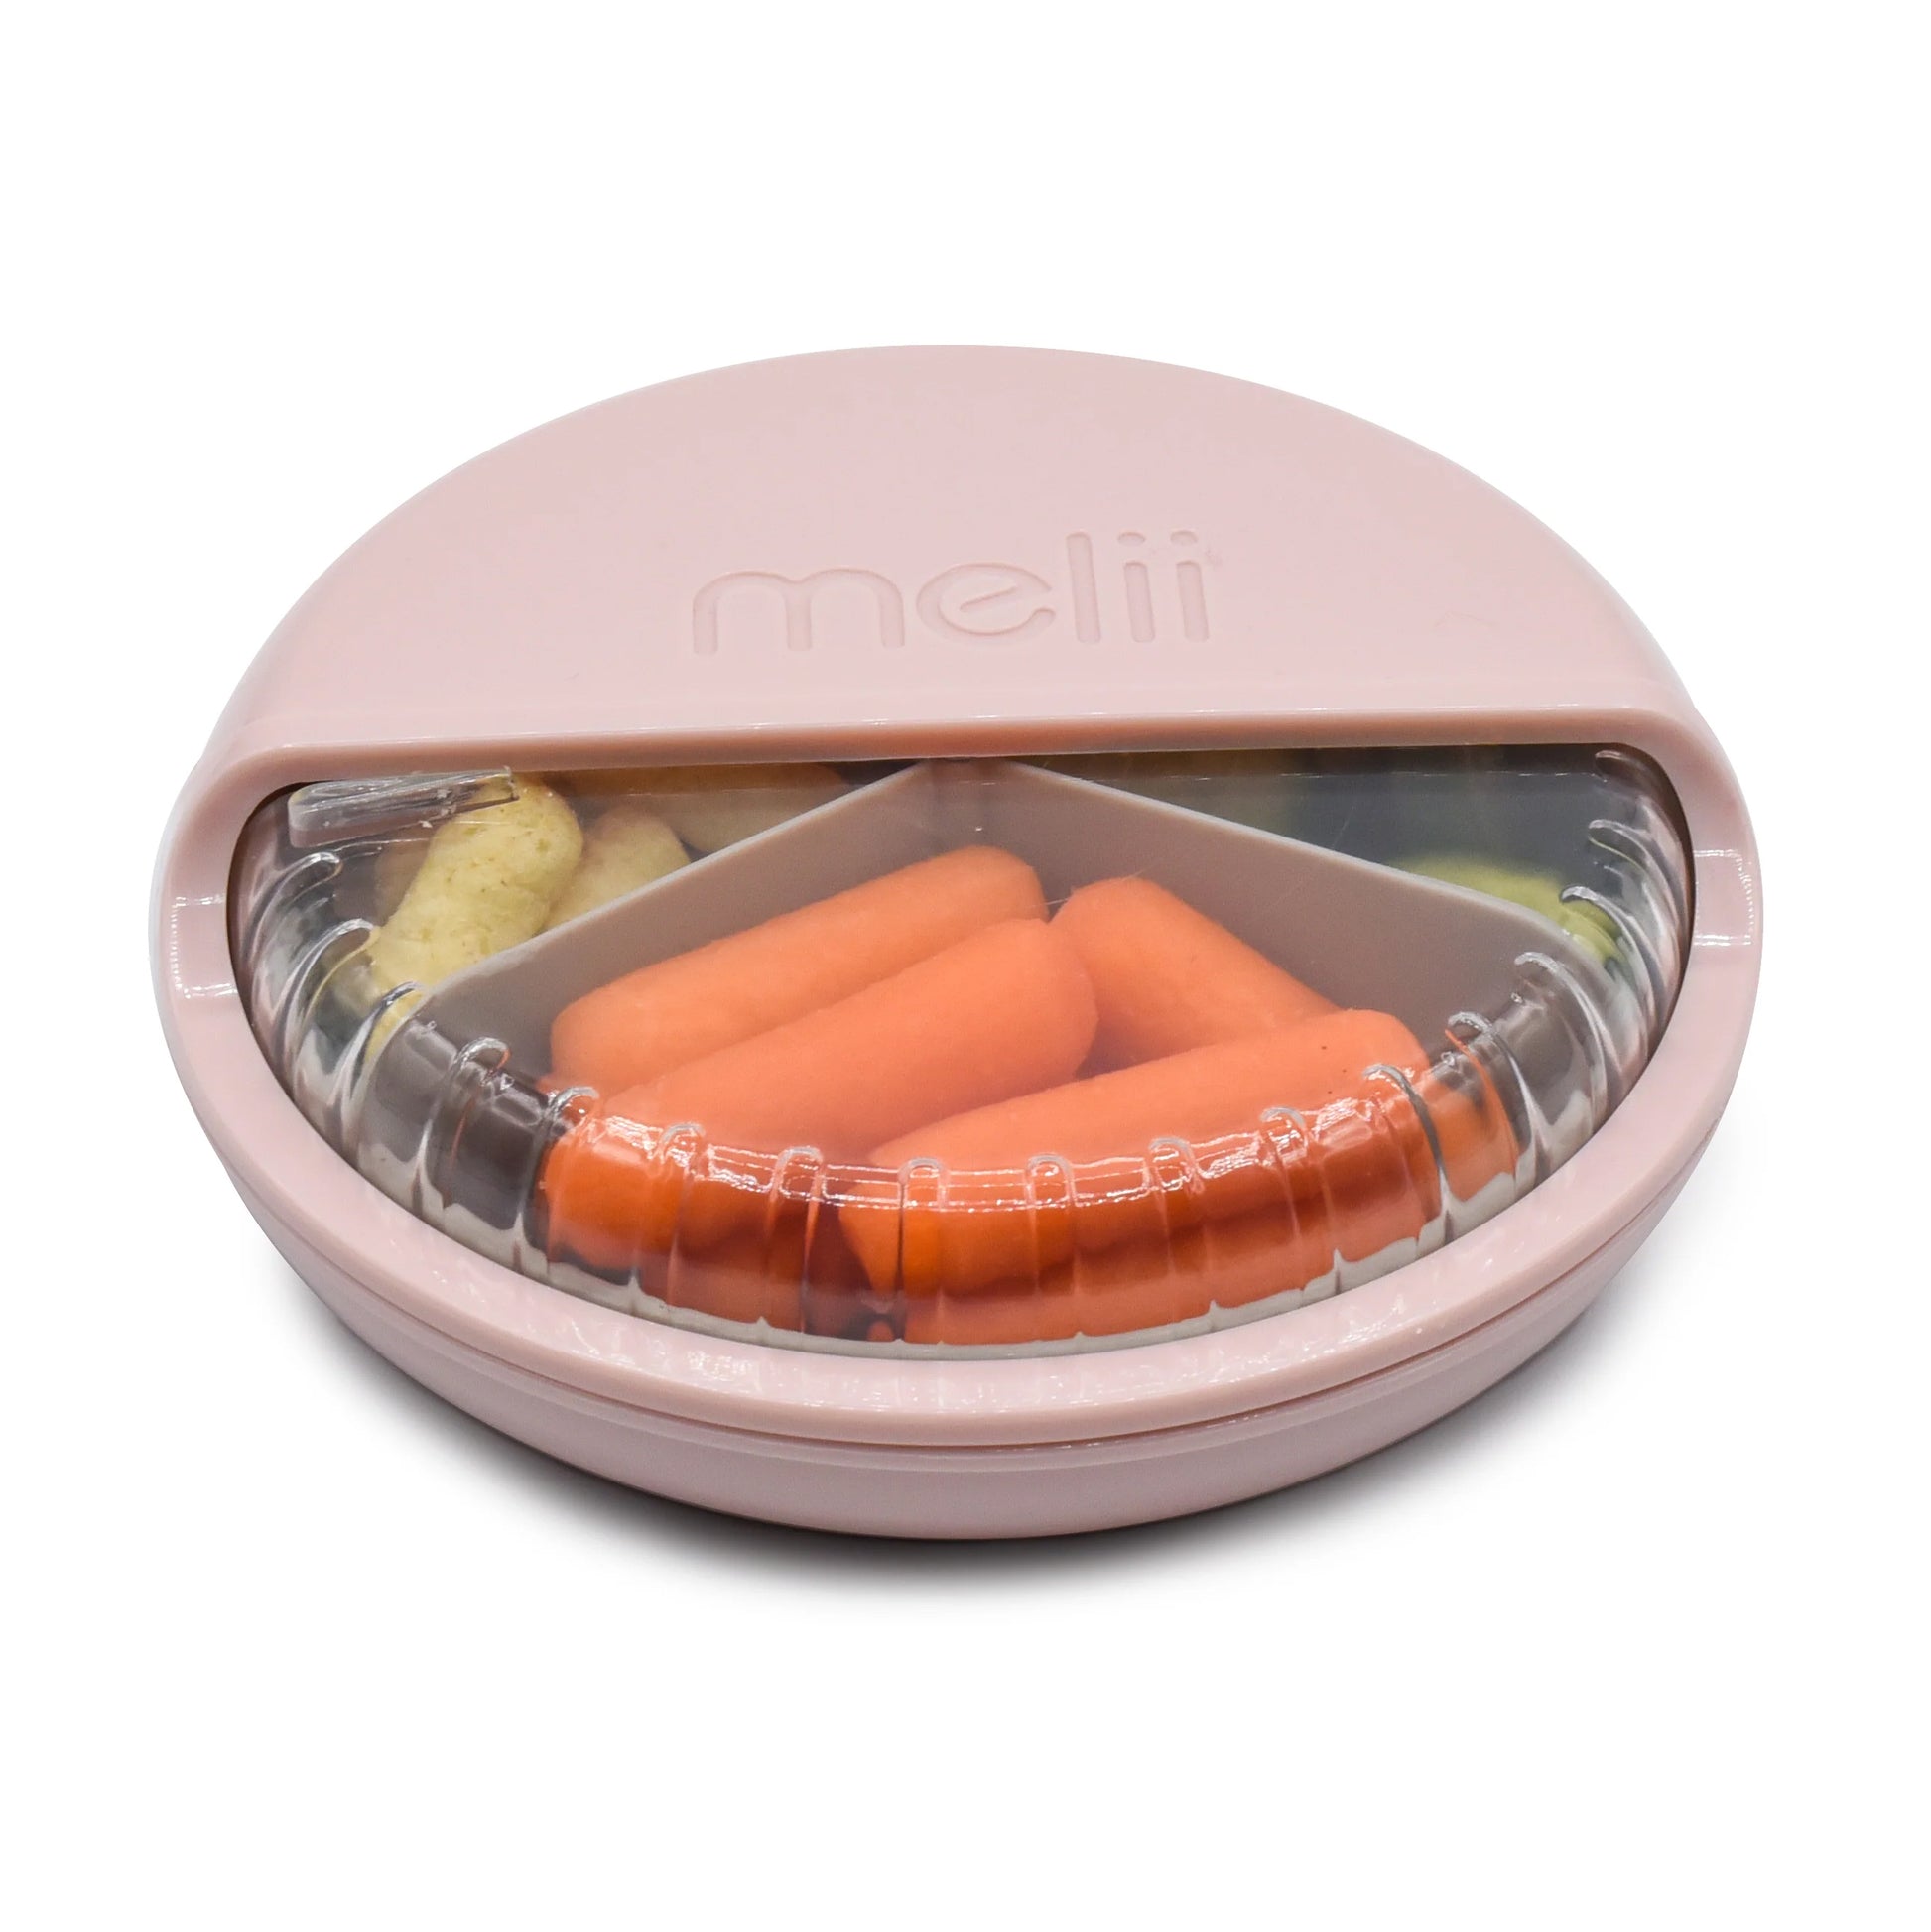 melii Spin Container for Kids - 3-Compartment Snack Container with Exciting Spin Feature - BPA Free, Portable, and Easy to Clean Snack Companion for On the Go Adventures